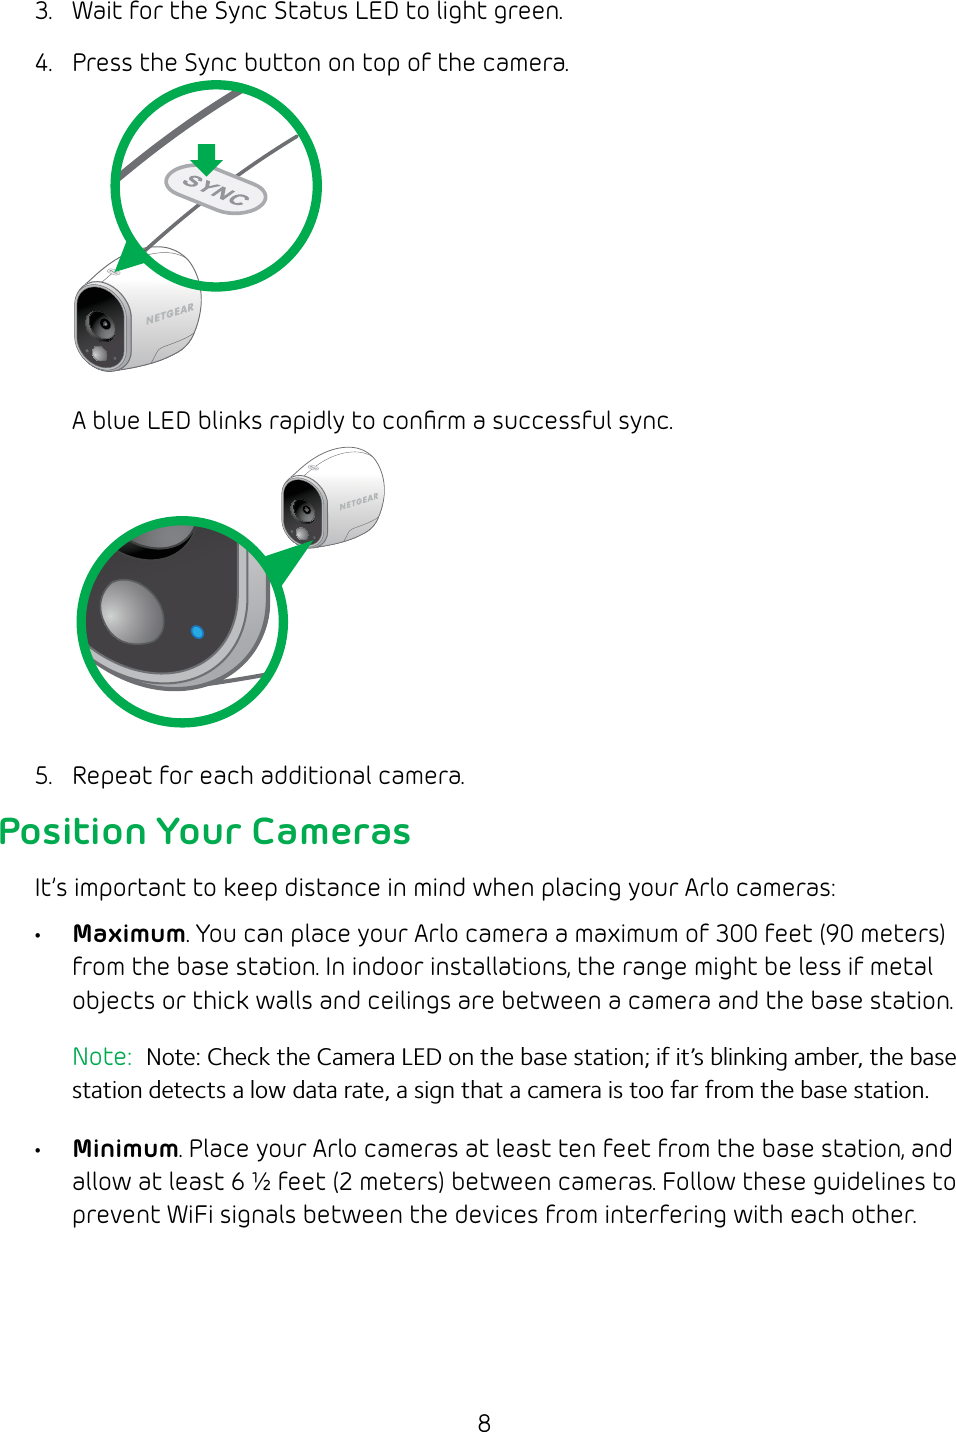 83.  Wait for the Sync Status LED to light green.4.  Press the Sync button on top of the camera.A blue LED blinks rapidly to conﬁrm a successful sync.5.  Repeat for each additional camera.Position Your CamerasIt’s important to keep distance in mind when placing your Arlo cameras:• Maximum. You can place your Arlo camera a maximum of 300 feet (90 meters)from the base station. In indoor installations, the range might be less if metal objects or thick walls and ceilings are between a camera and the base station. Note:  Note: Check the Camera LED on the base station; if it’s blinking amber, the base station detects a low data rate, a sign that a camera is too far from the base station.• Minimum. Place your Arlo cameras at least ten feet from the base station, and allow at least 6 ½ feet (2 meters) between cameras. Follow these guidelines to prevent WiFi signals between the devices from interfering with each other.